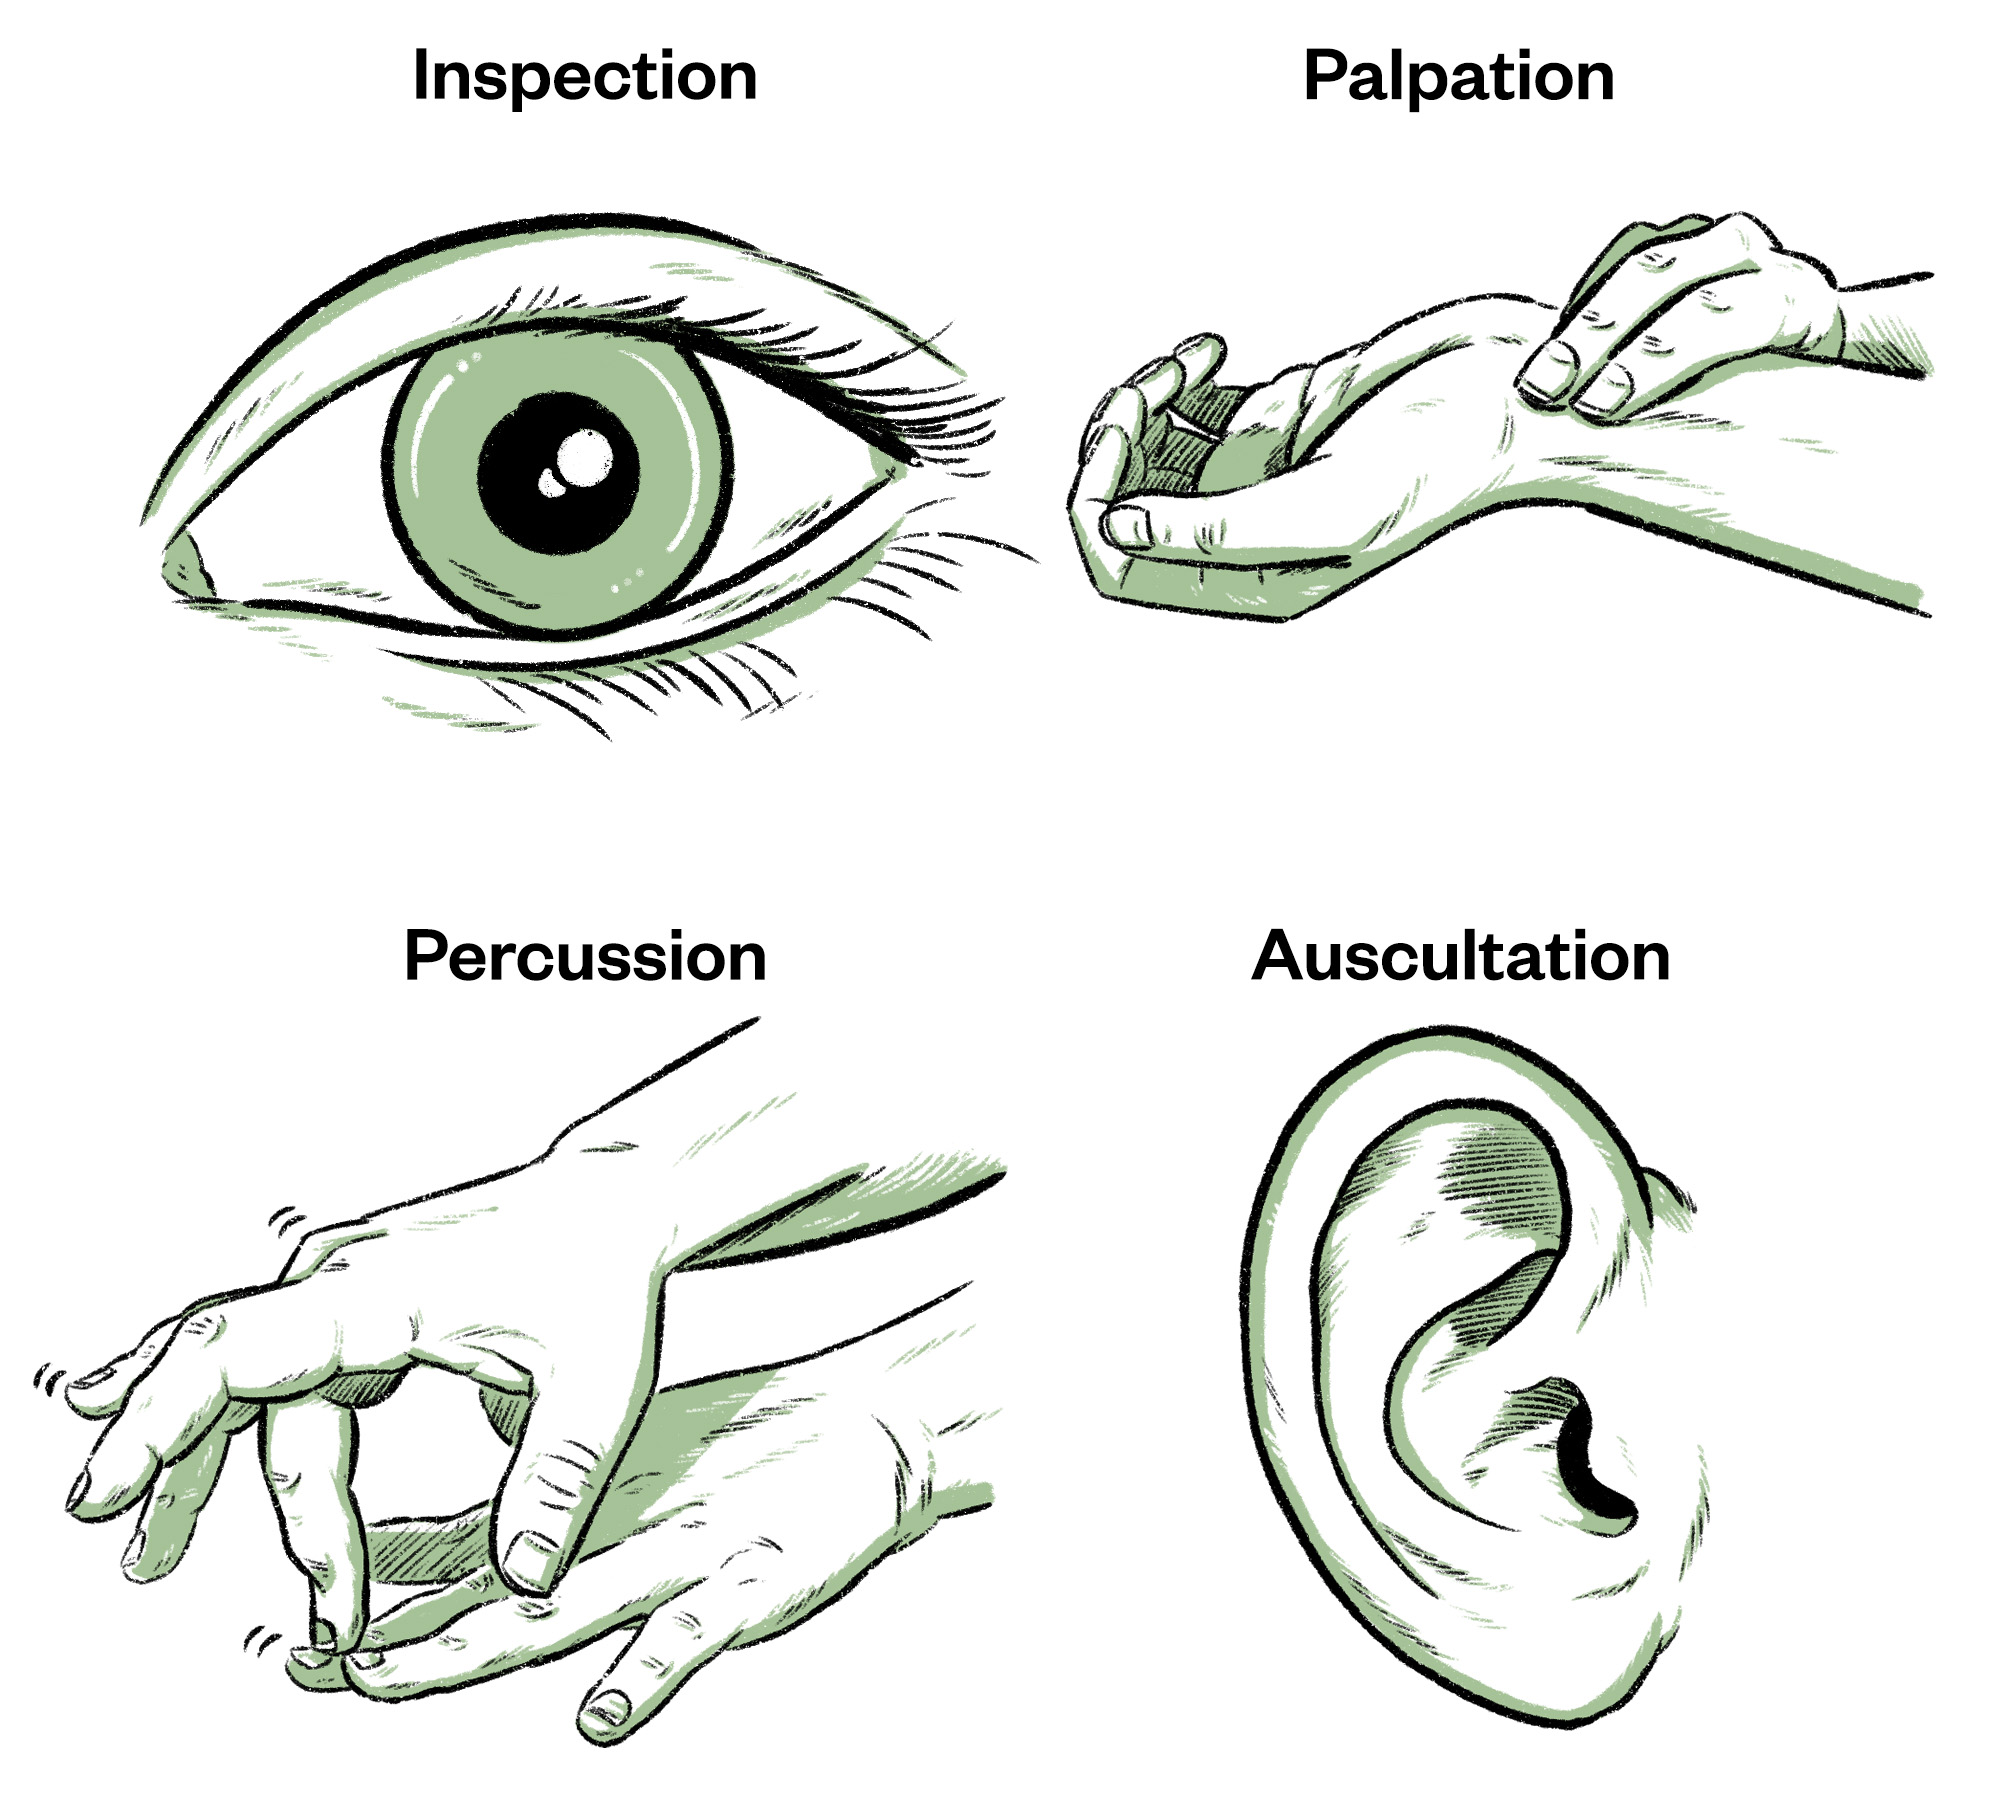 Illustration of the four key objective assessment techniques: 1) inspection, 2) auscultation, 3) percussion, 4) palpation